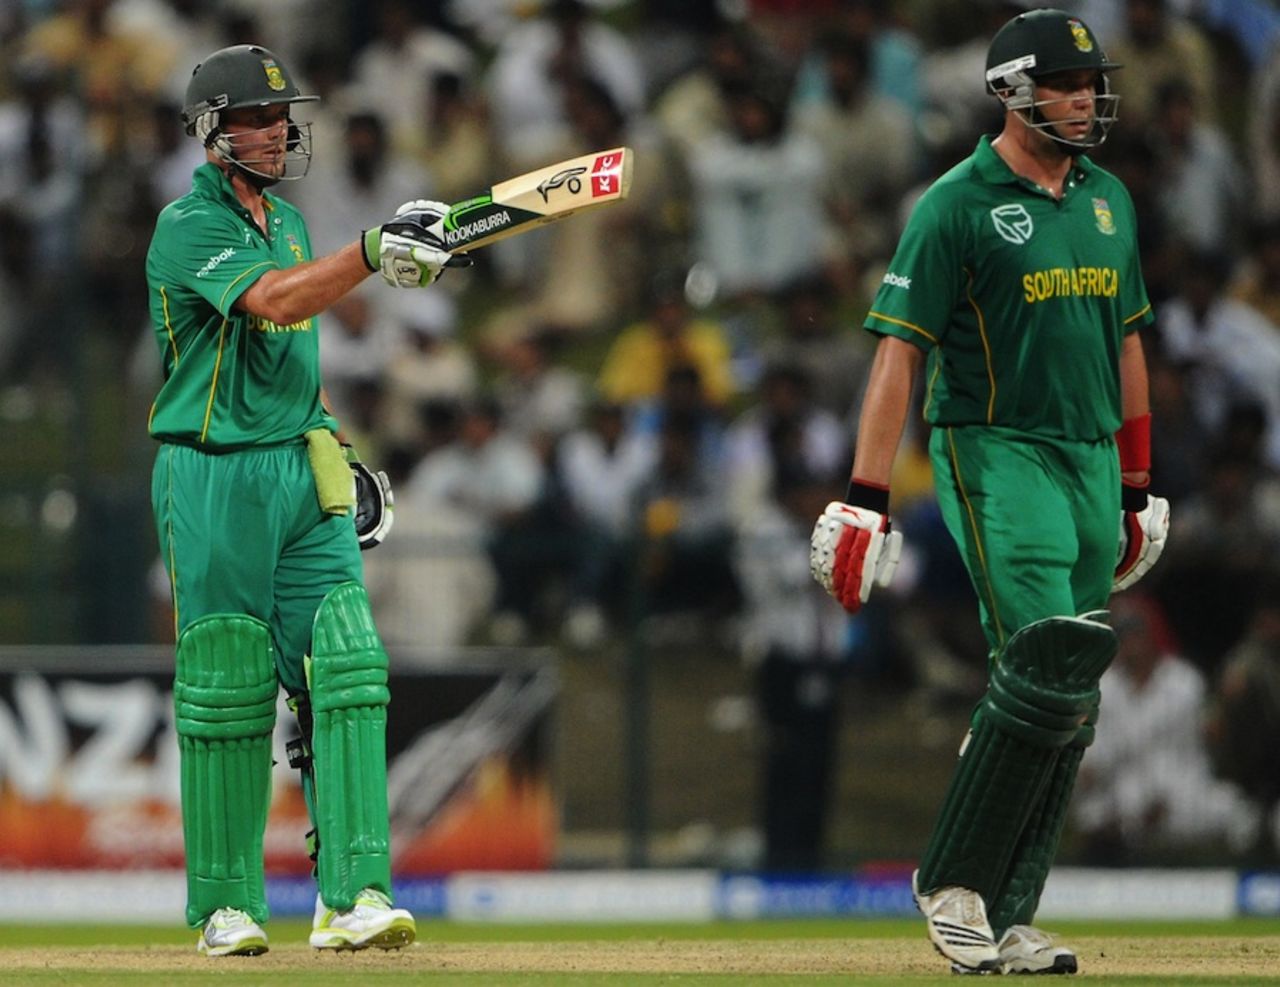 AB de Villiers reaches fifty, Jacques Kallis is drenched in sweat, Pakistan v South Africa, 1st ODI, Abu Dhabi, October 29, 2010